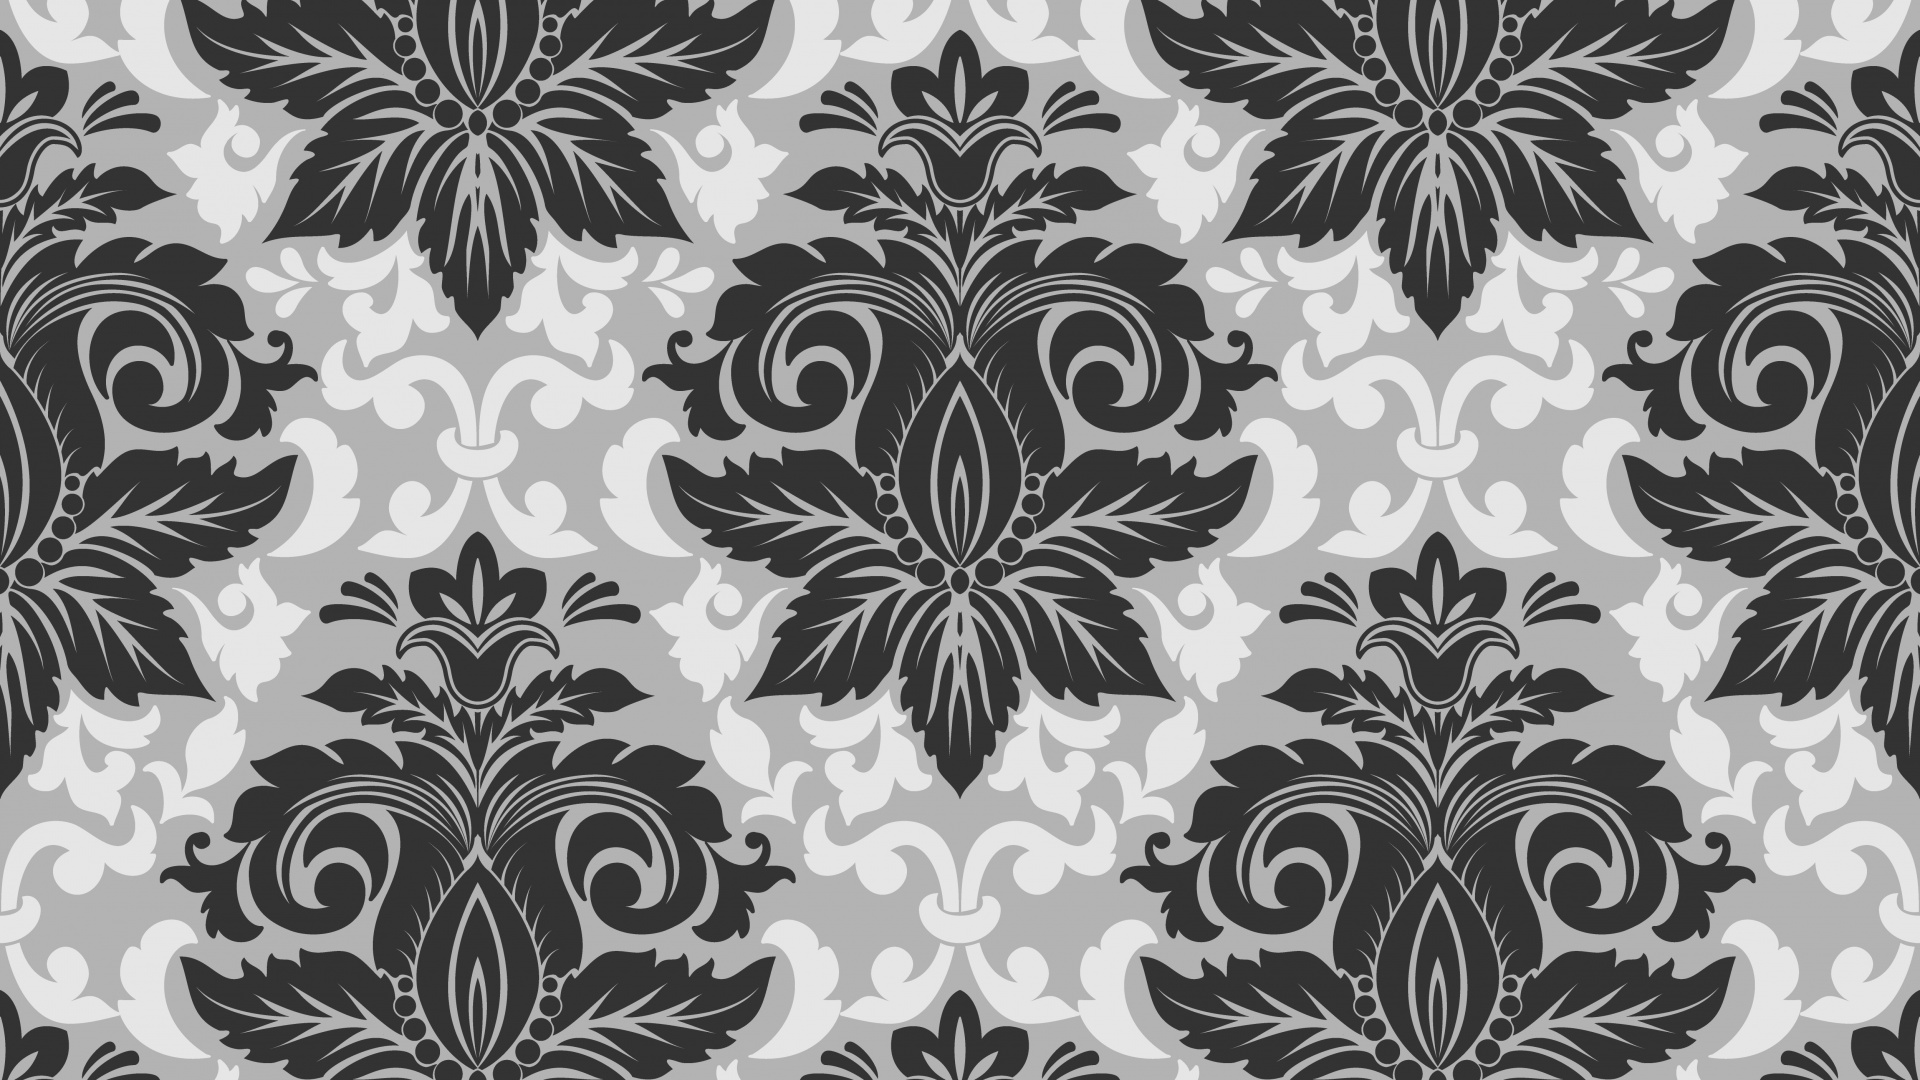 Black and White Floral Textile. Wallpaper in 1920x1080 Resolution